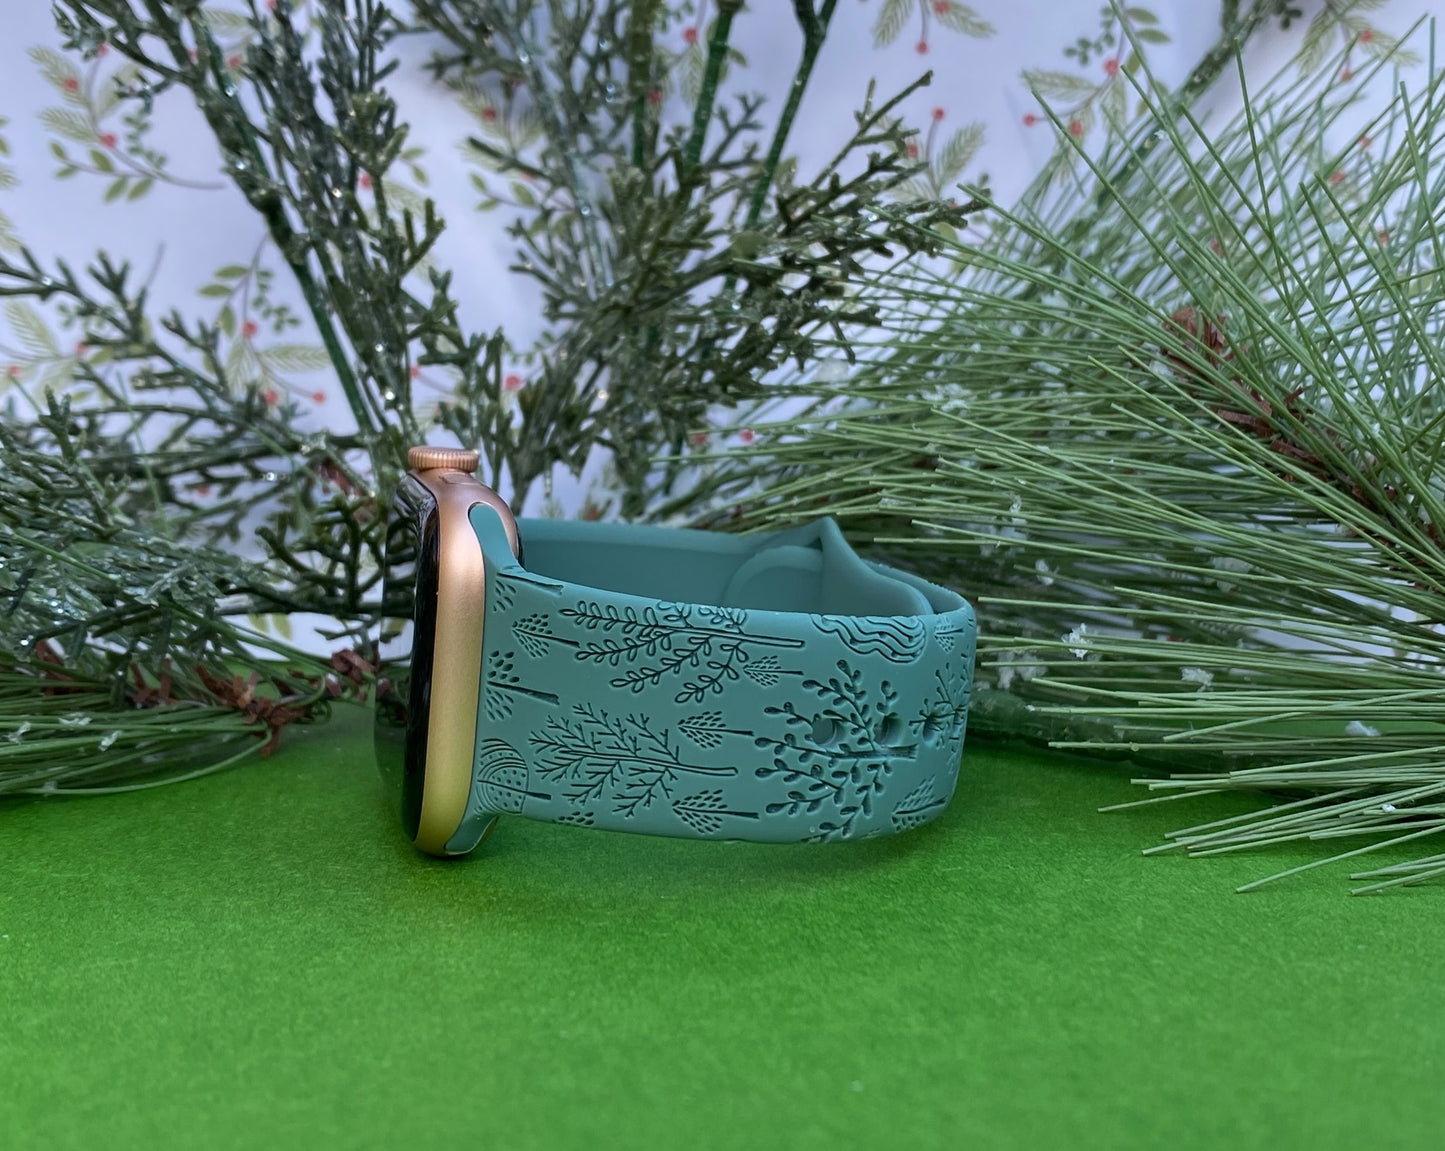 Winter Trees Apple Watch Band